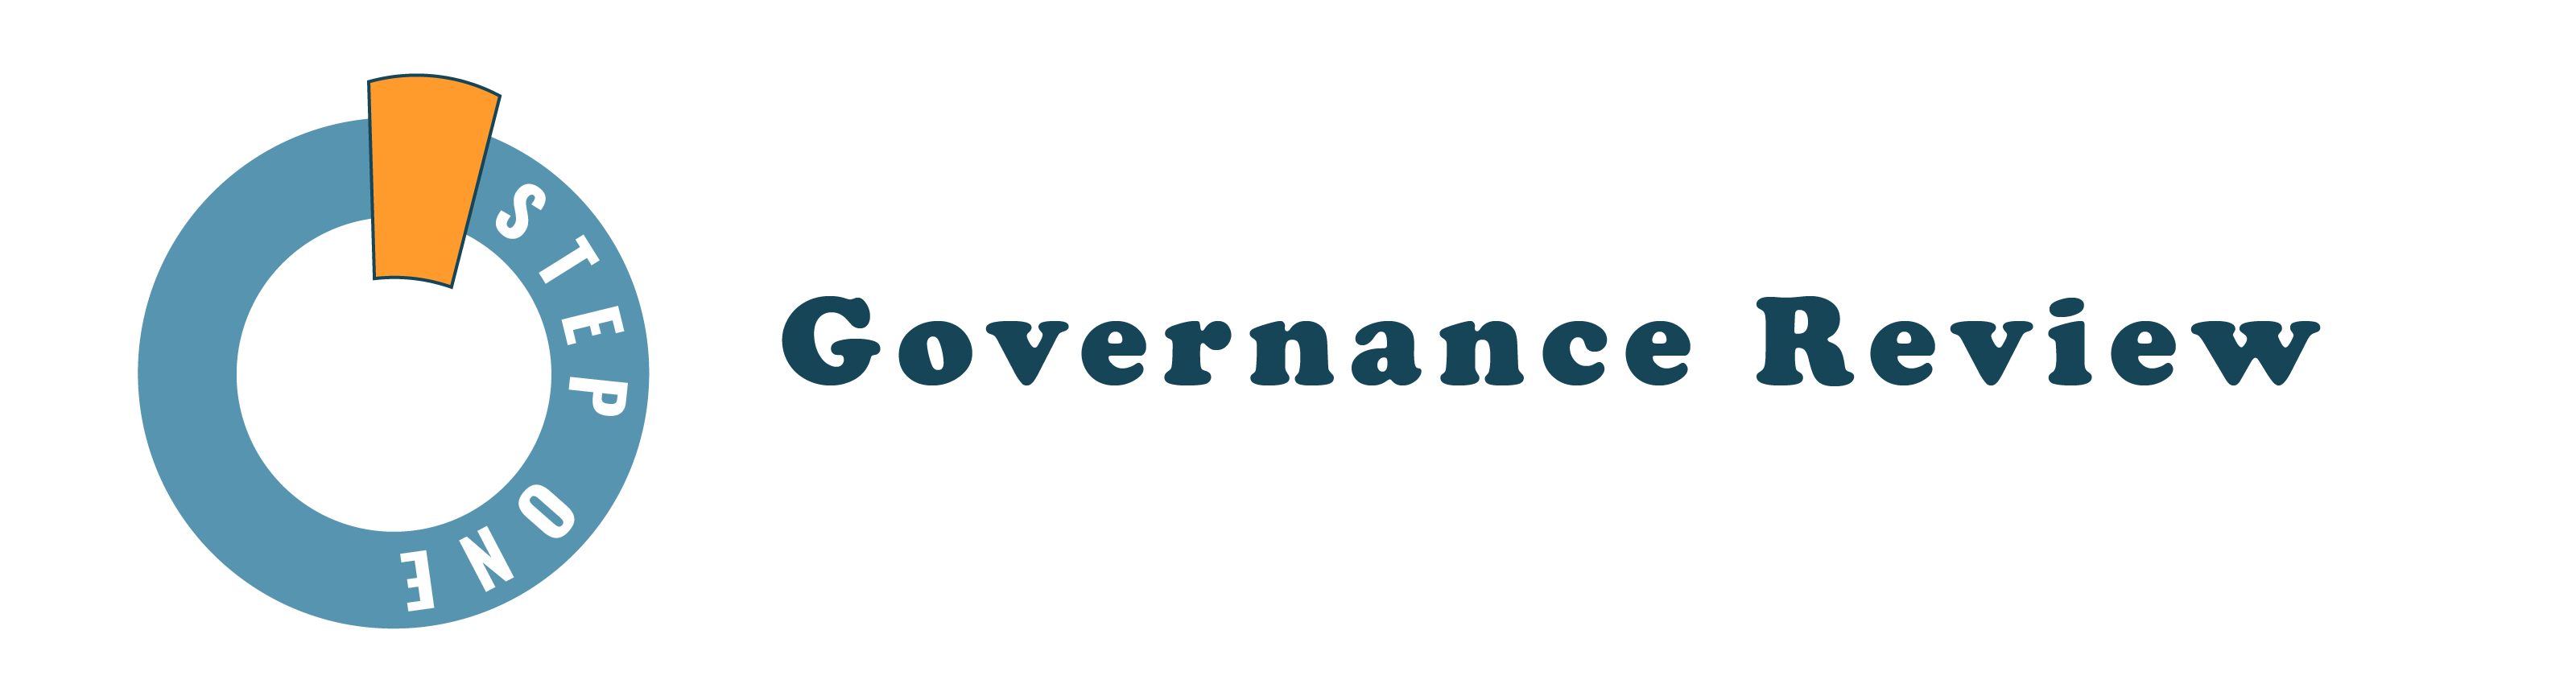 governance review 